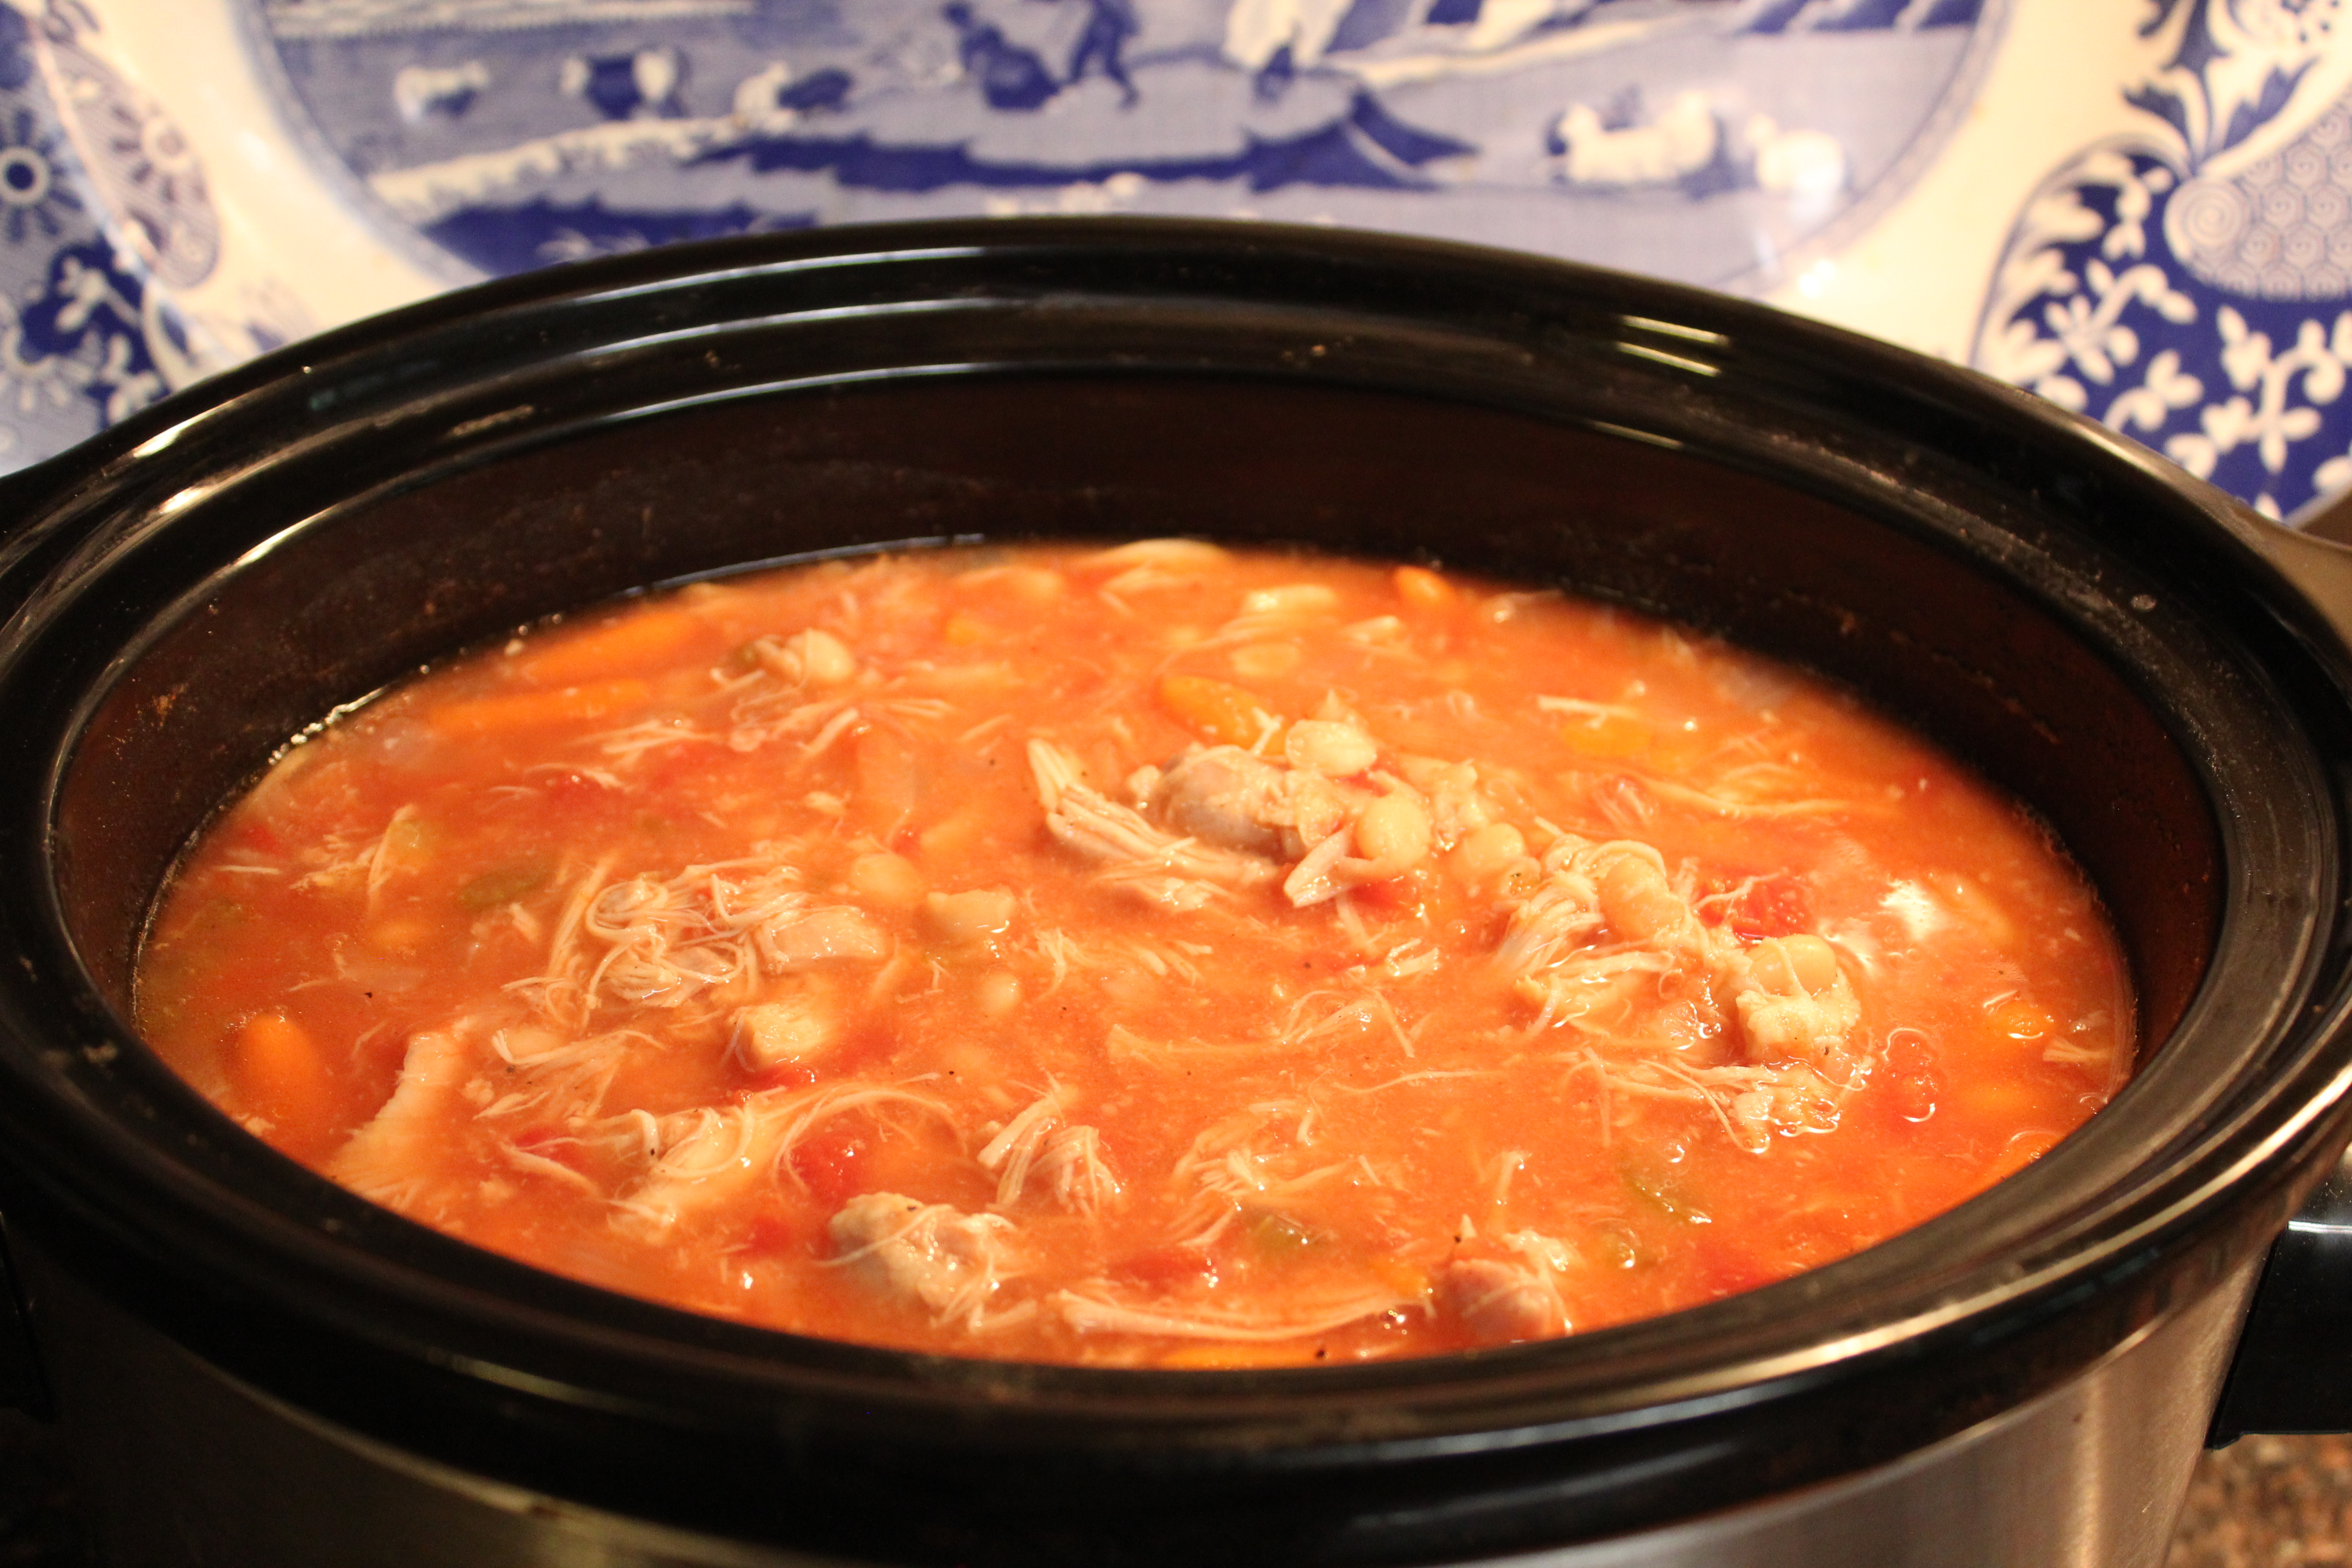 Prepare easy meals in slow cooker on busy days